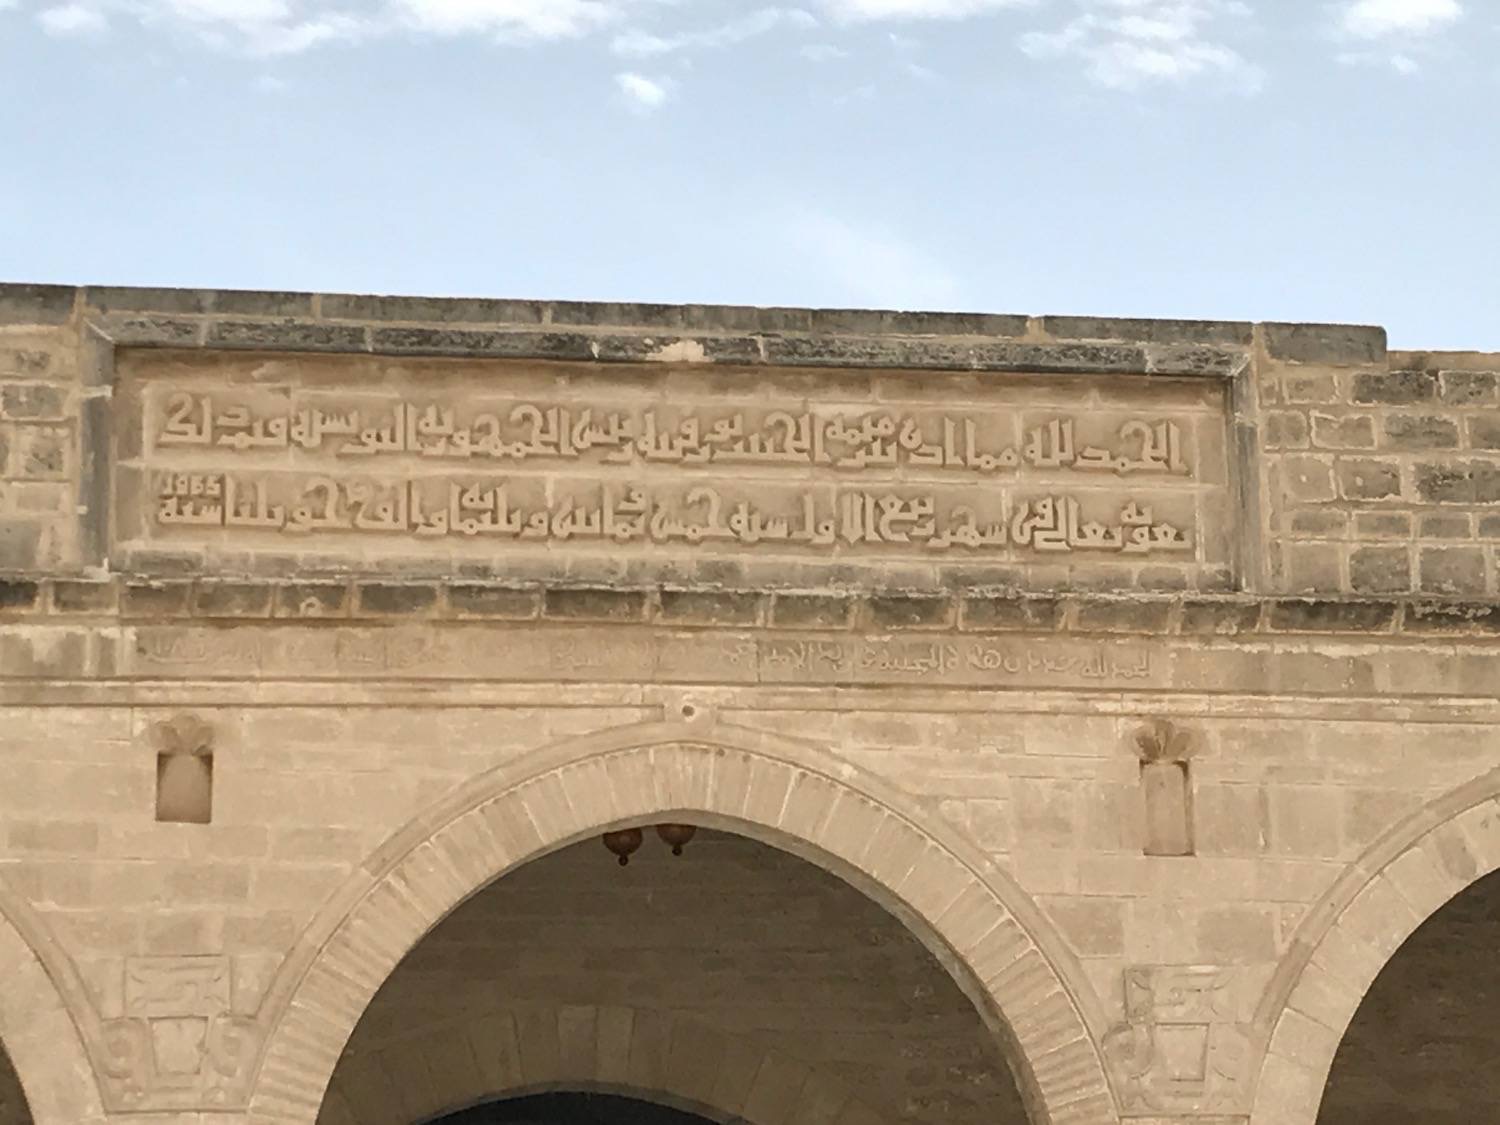 View of inscriptions over an arch